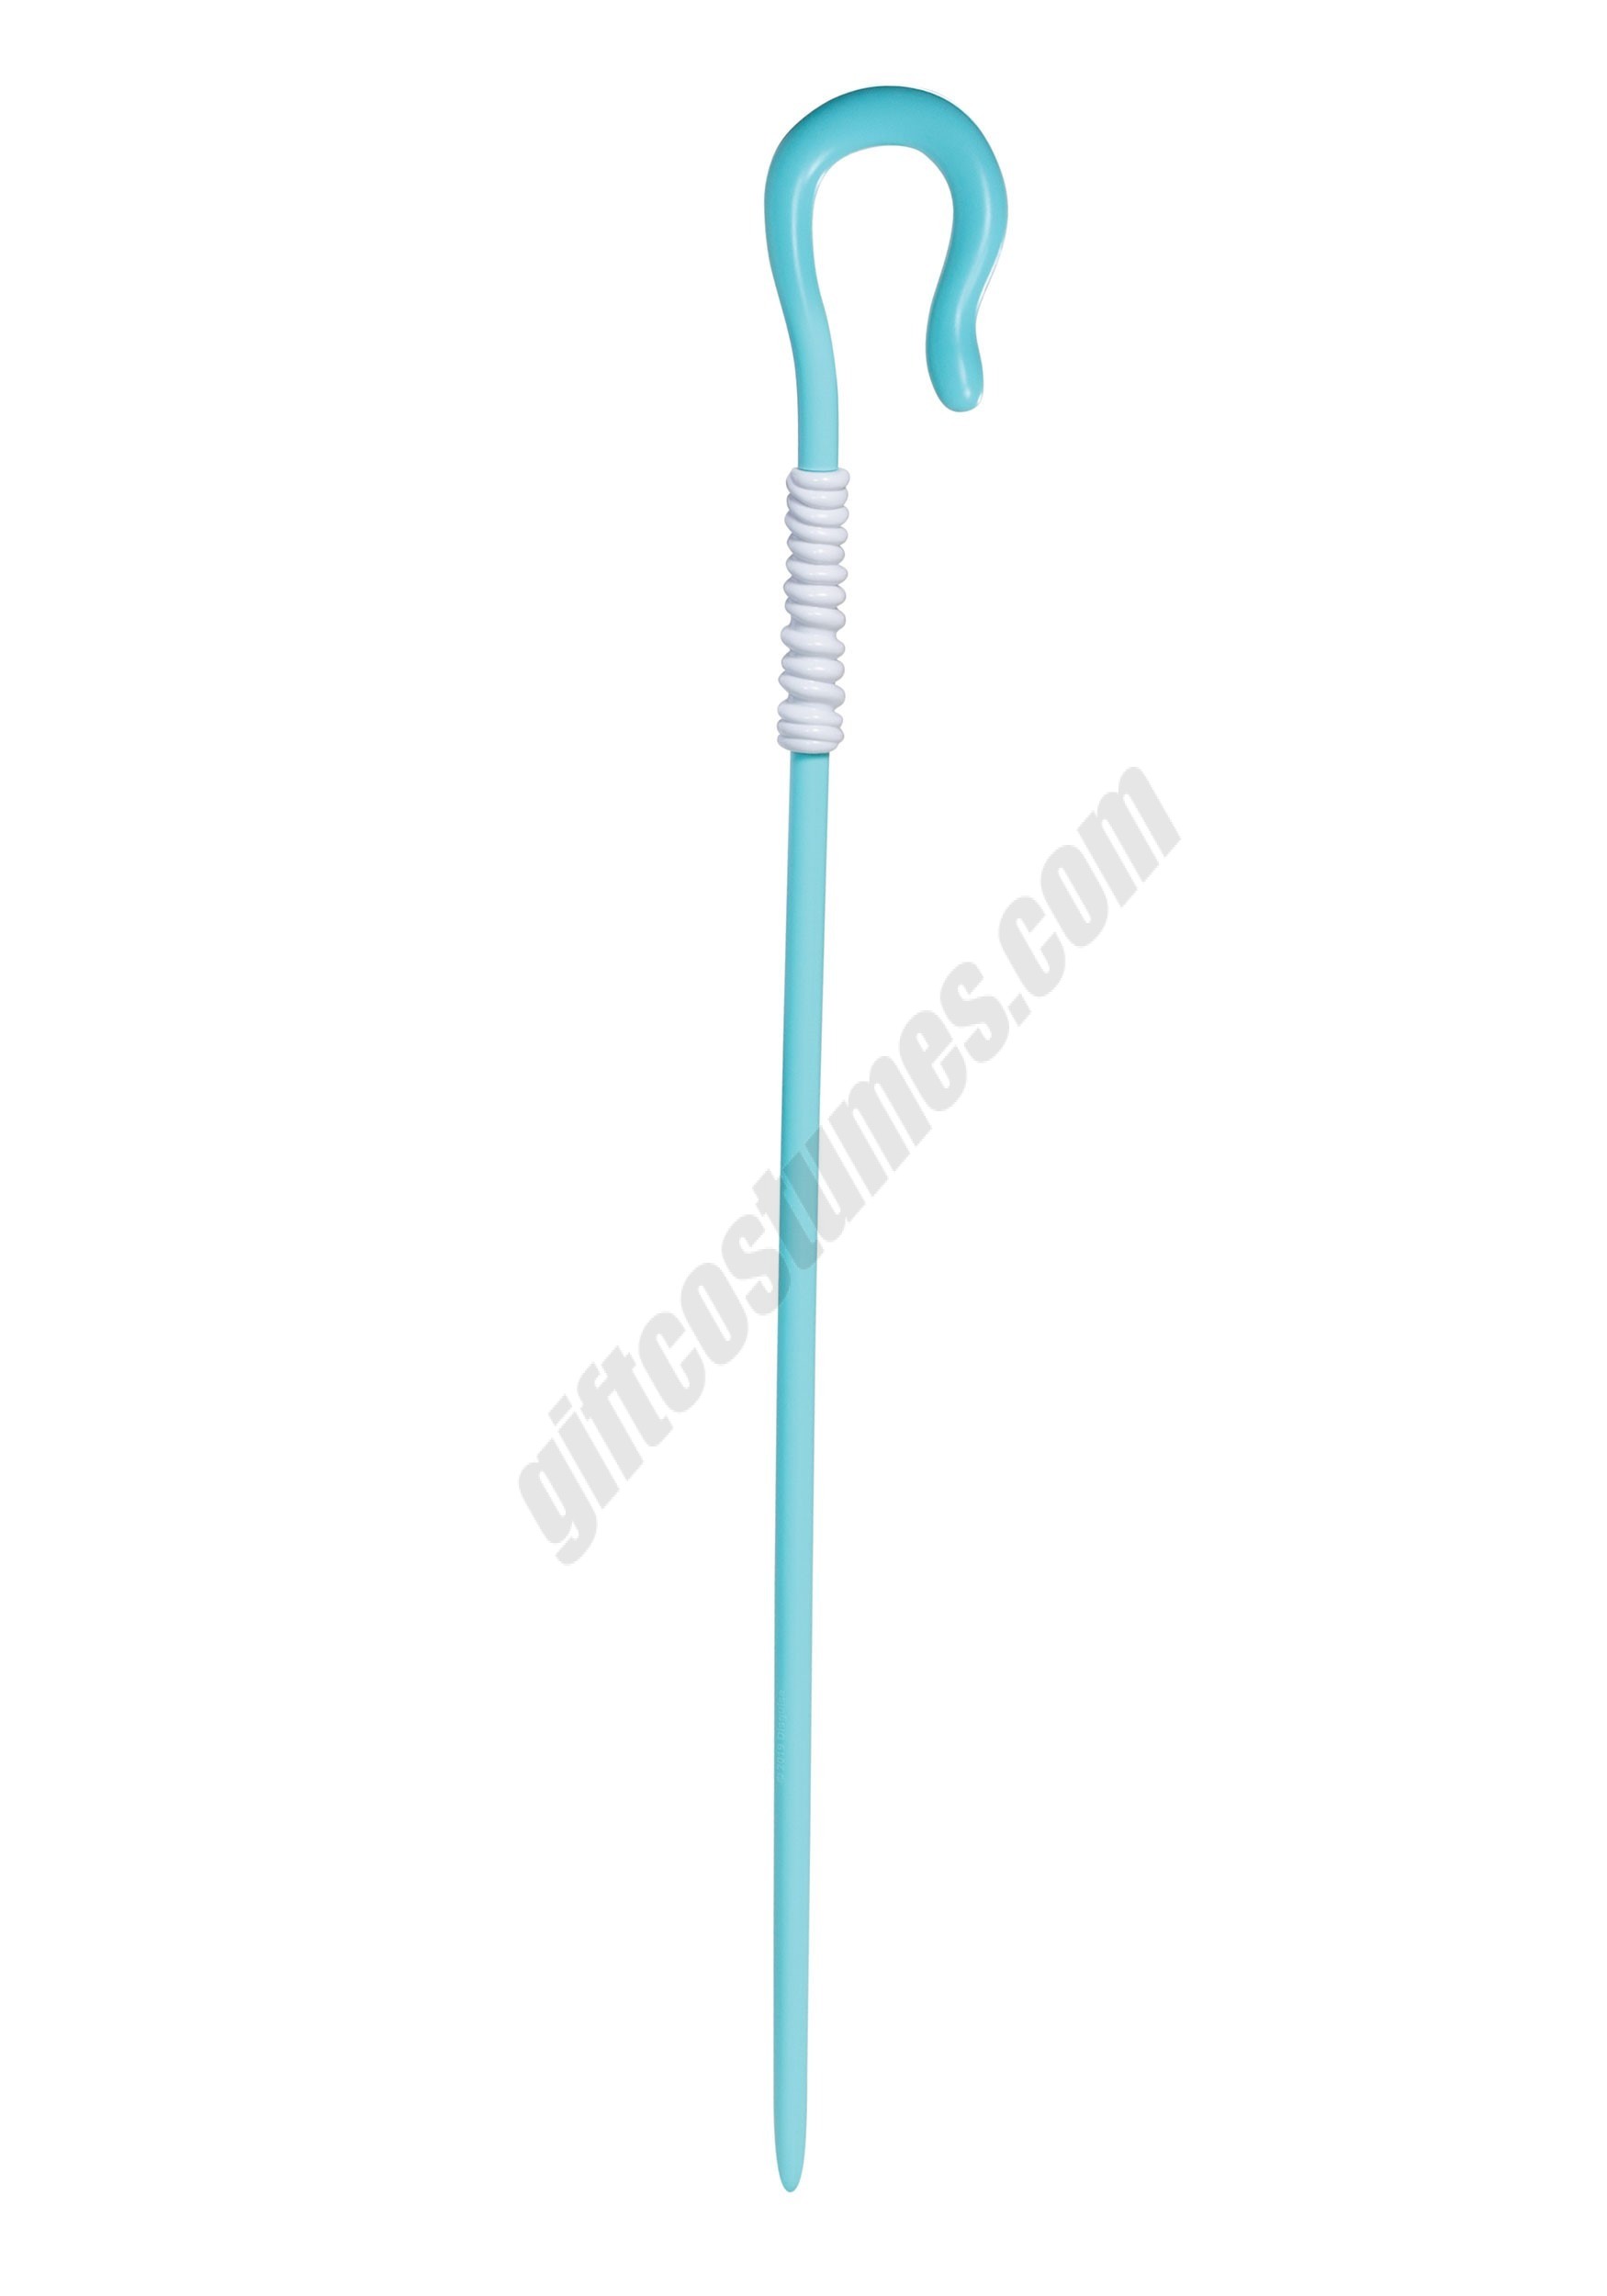 Toy Story Bo Peep's Staff Accessory Promotions - Toy Story Bo Peep's Staff Accessory Promotions